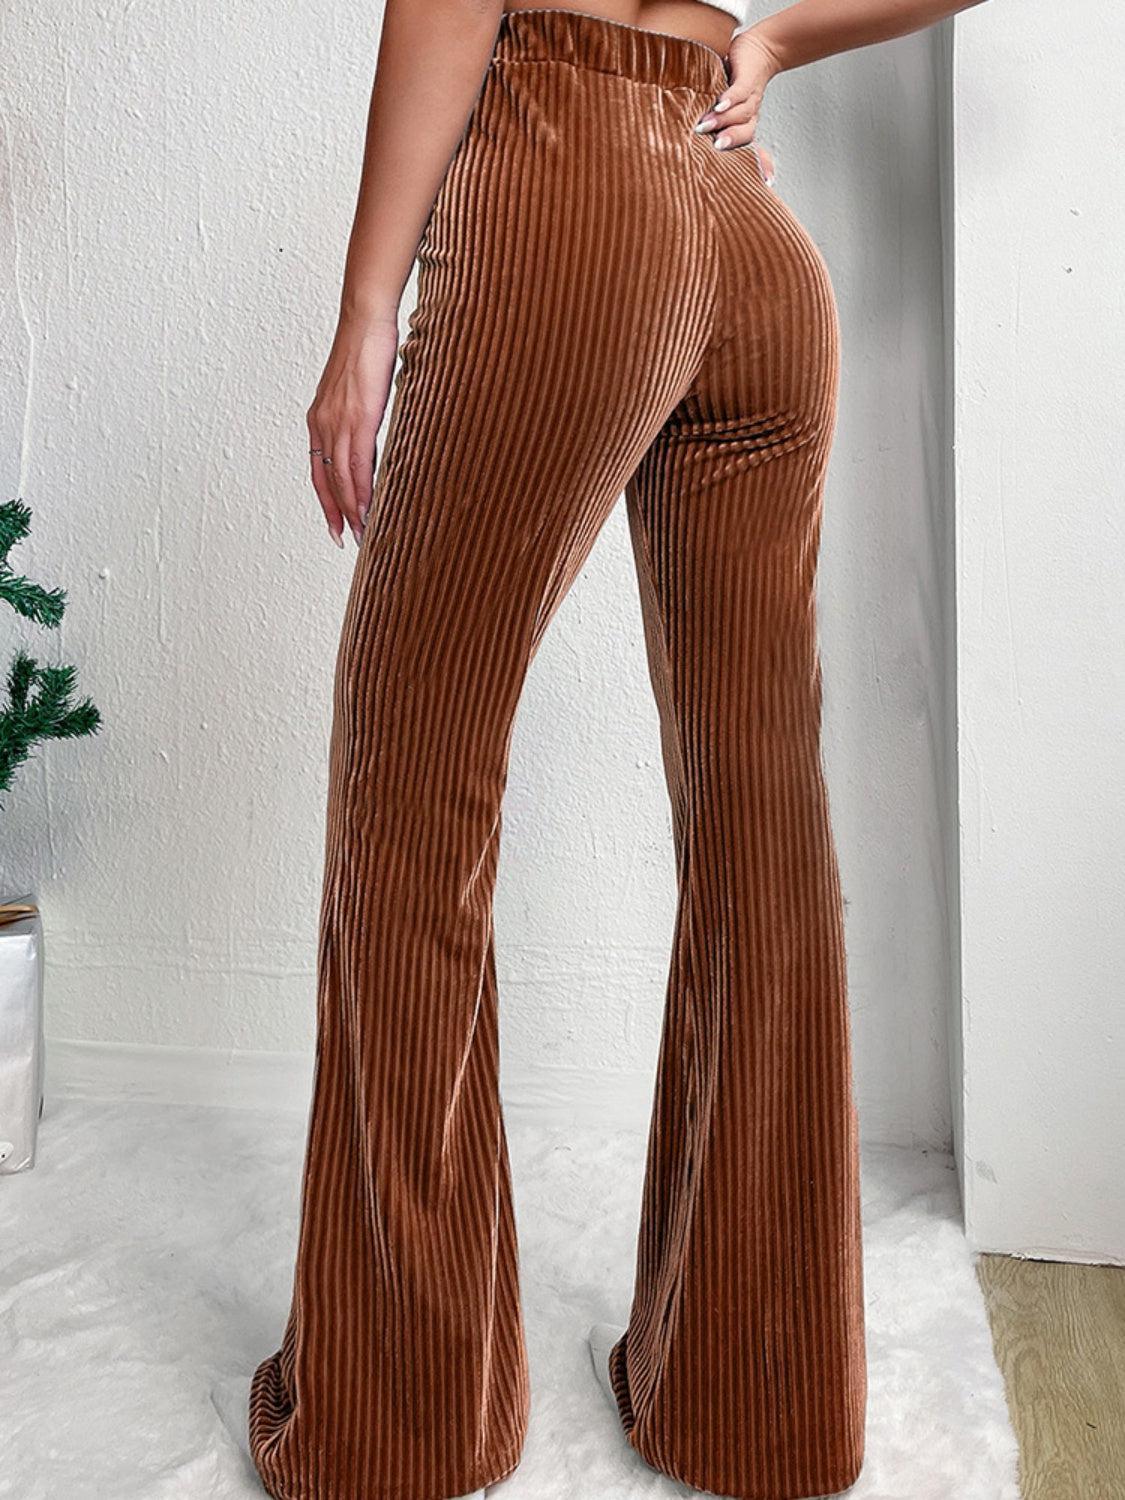 a woman in brown pants standing in a room